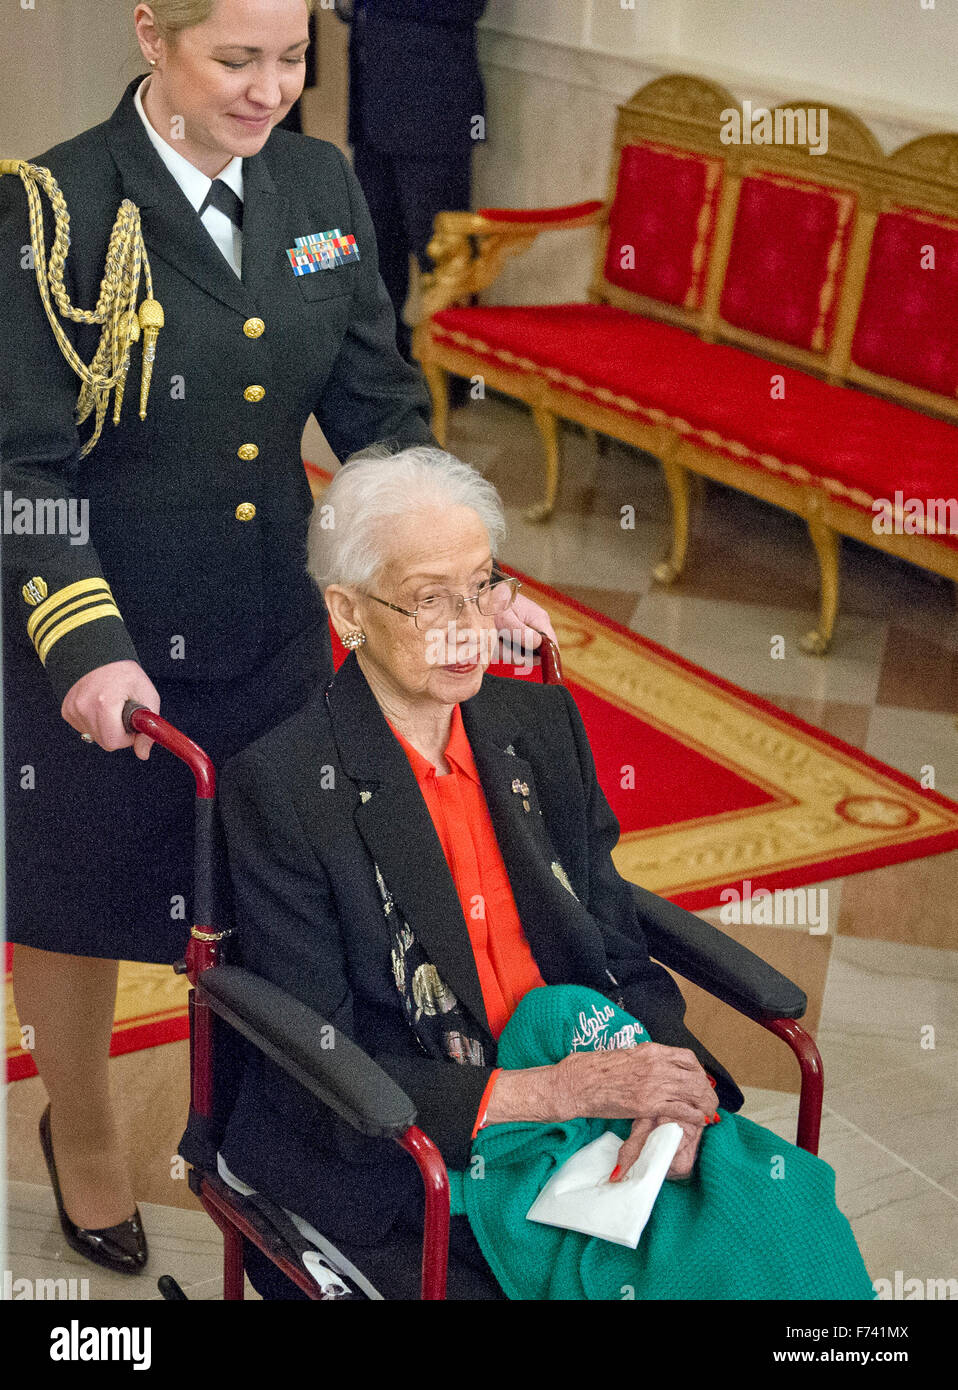 NASA mathematician Katherine G. Johnson arrives to receive the Presidential Medal of Freedom from United States President Barack Obama during a ceremony in the East Room of the White House in Washington, DC on Tuesday, November 24, 2015. The Medal is the highest US civilian honor, presented to individuals who have made especially meritorious contributions to the security or national interests of the US, to world peace, or to cultural or significant public or private endeavors. Photo: Ron Sachs/CNP/dpa - NO WIRE SERVICE - Stock Photo